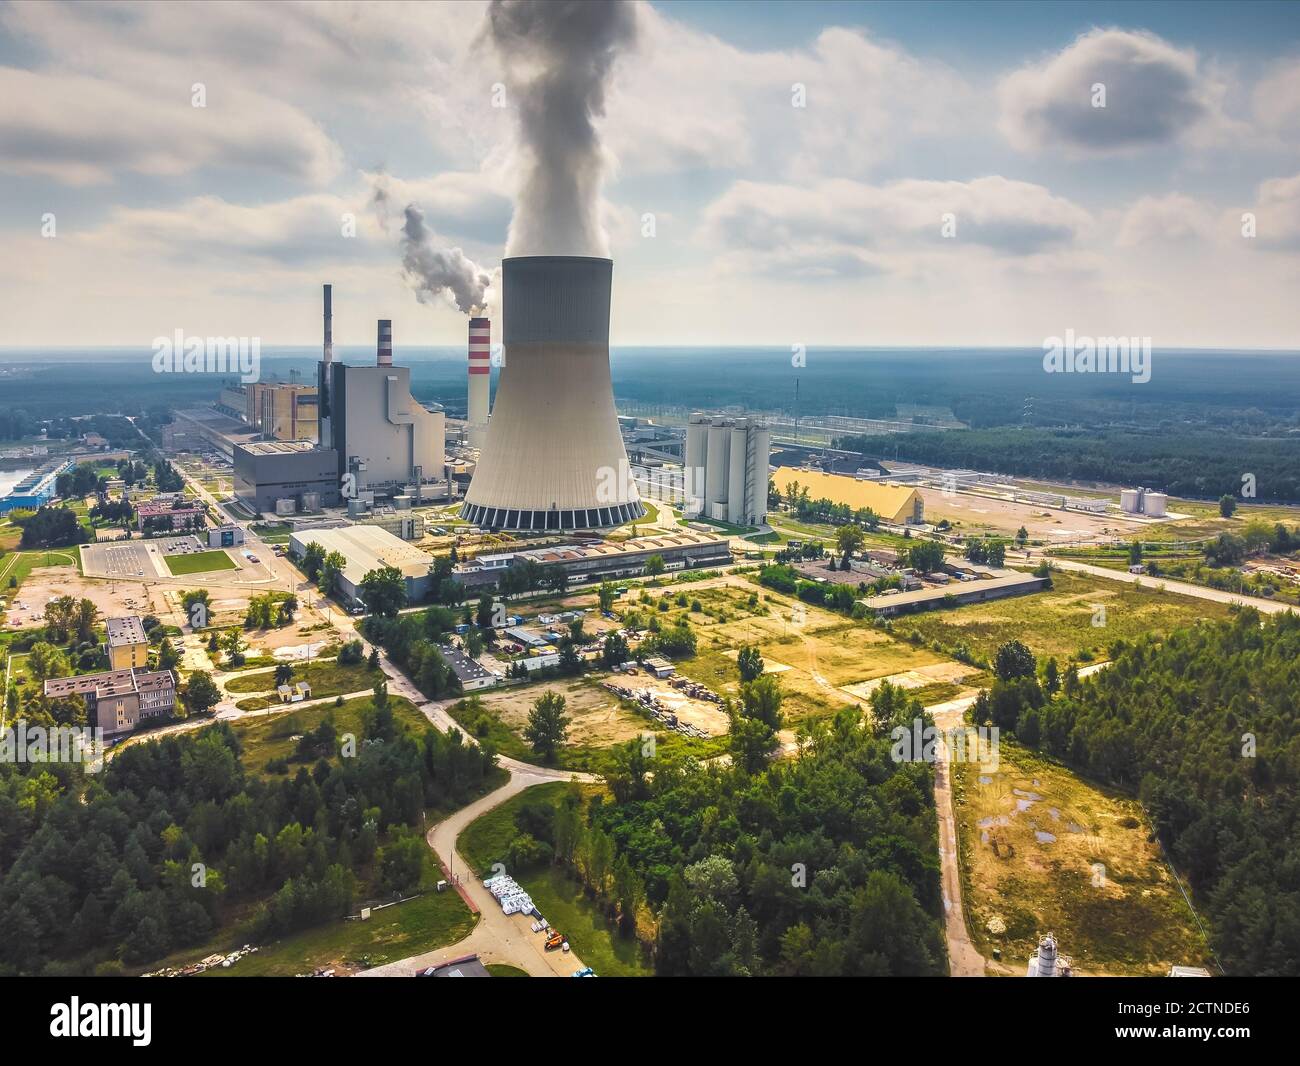 Large power station with steam coming from cooling tower. Drone, aerial view Stock Photo